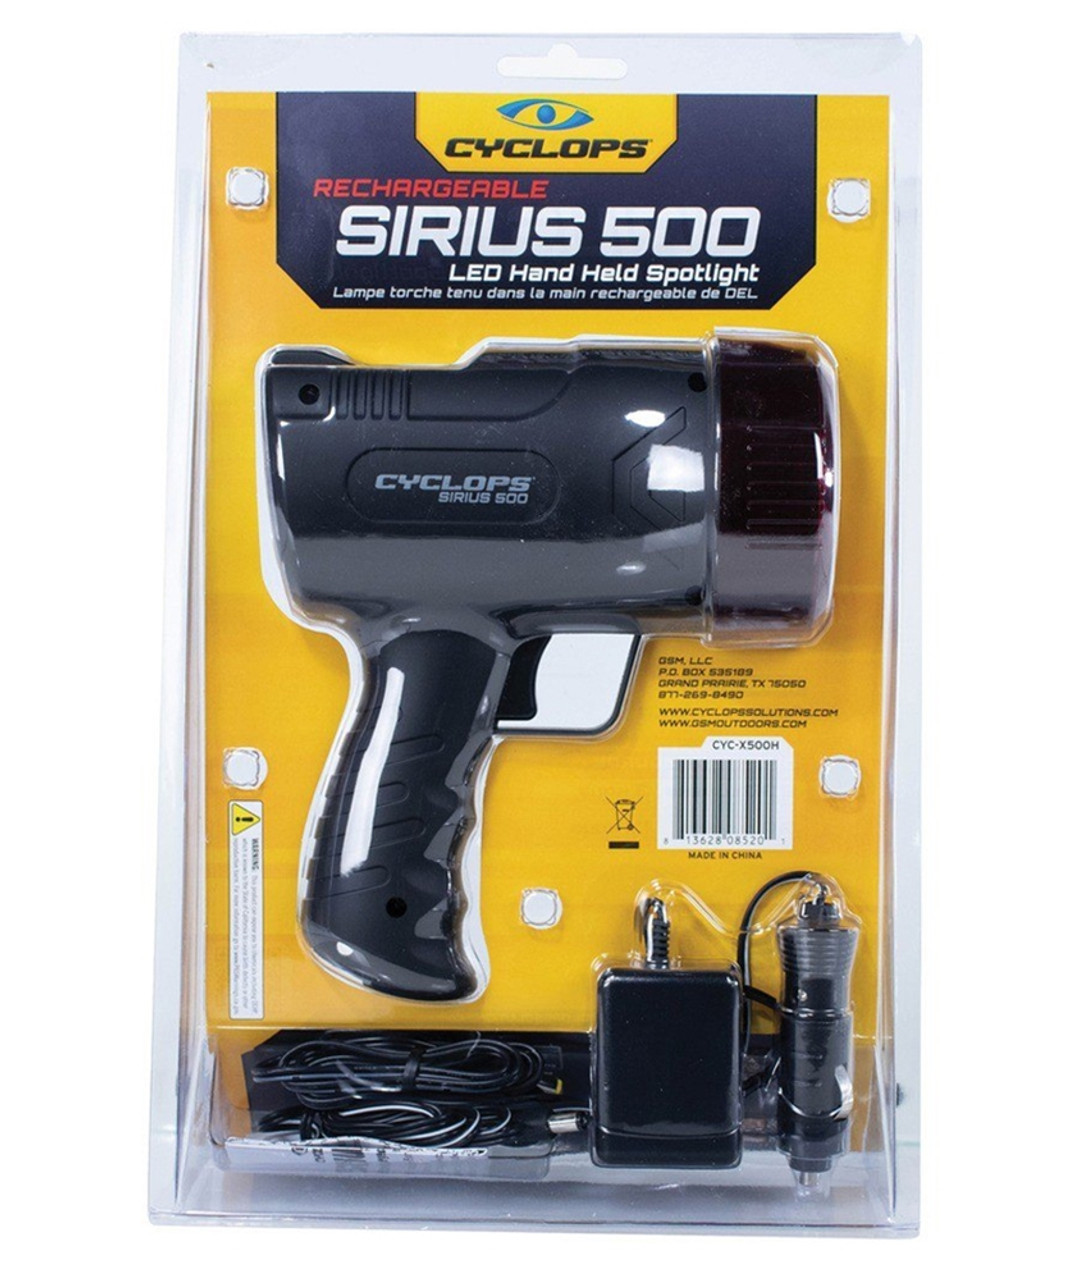 500-Lumen SIRIUS Handheld Rechargeable Spotlight with 6 LED Lights